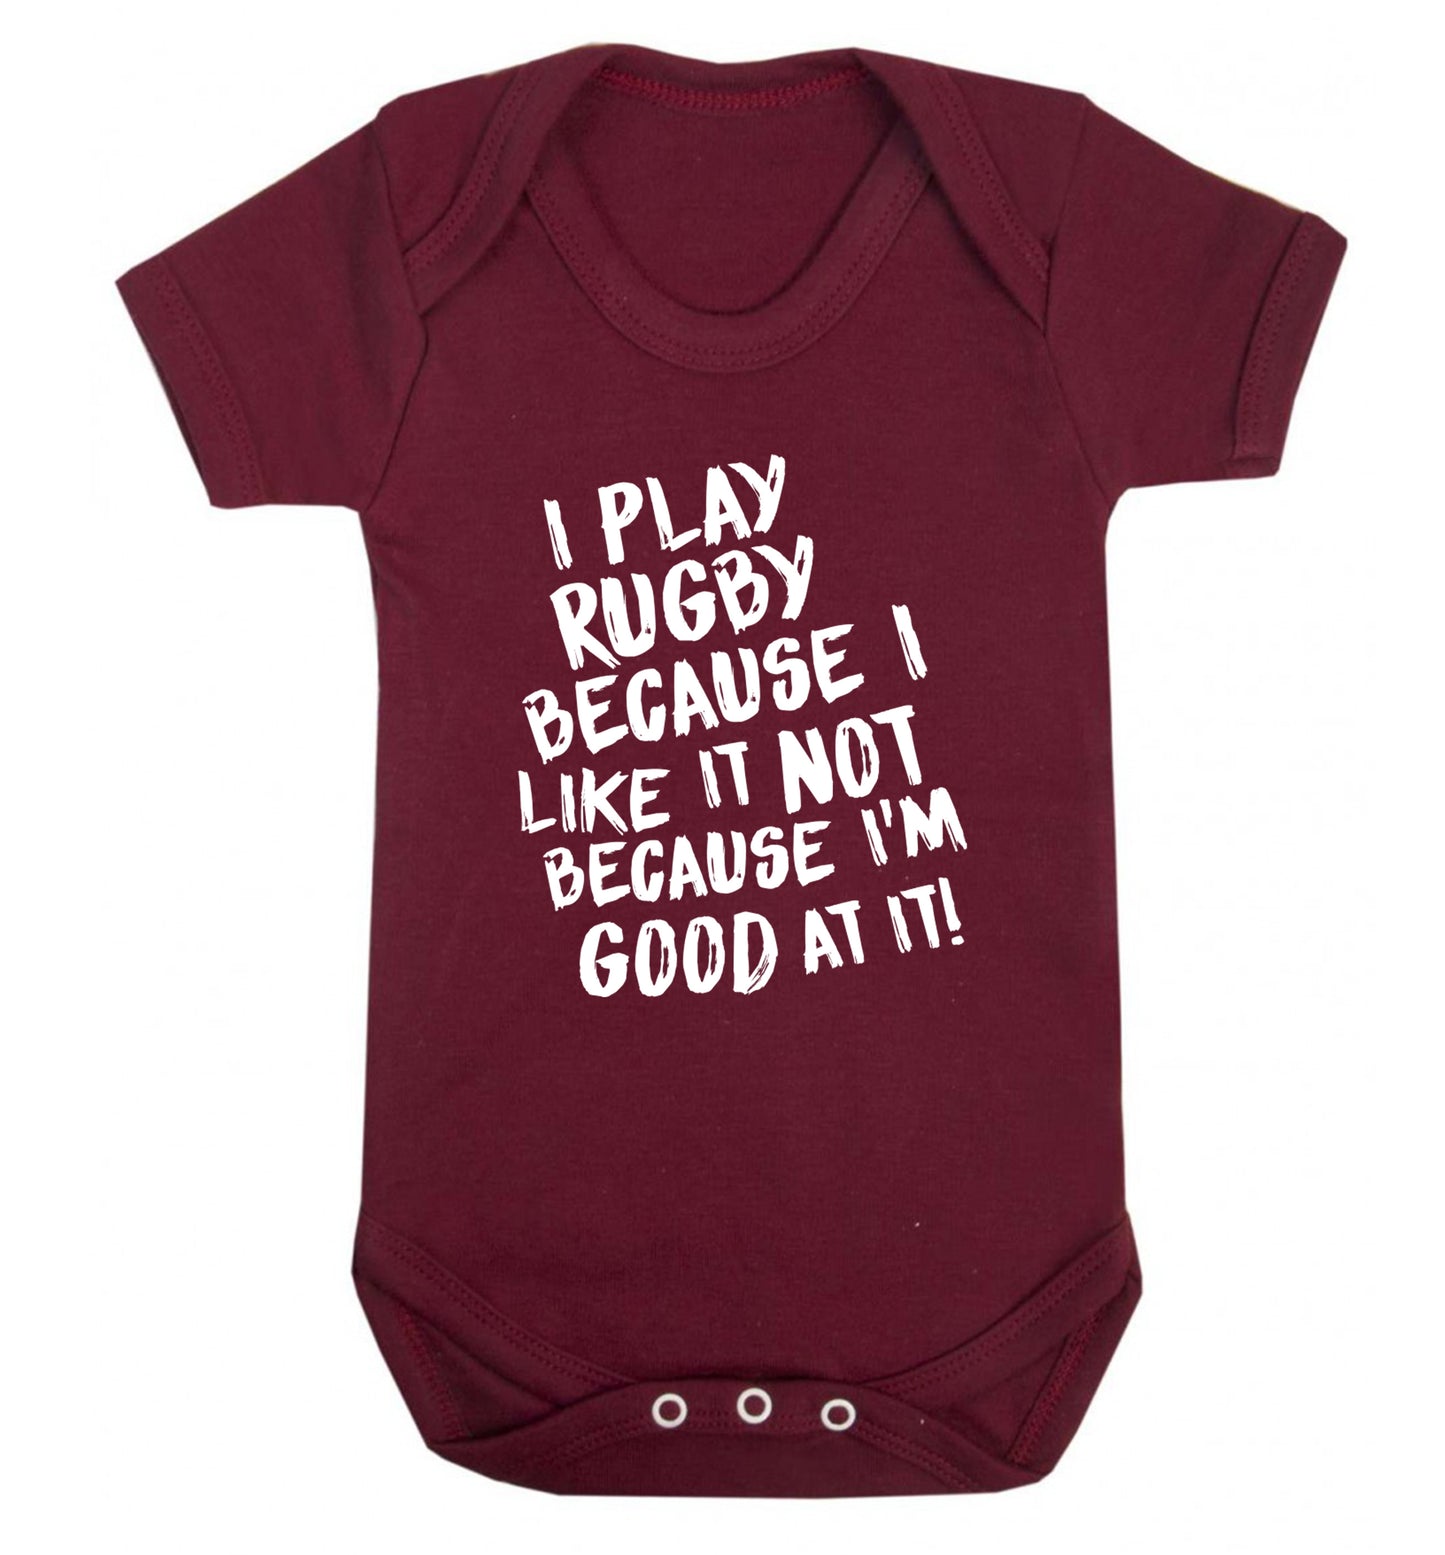 I play rugby because I like it not because I'm good at it Baby Vest maroon 18-24 months